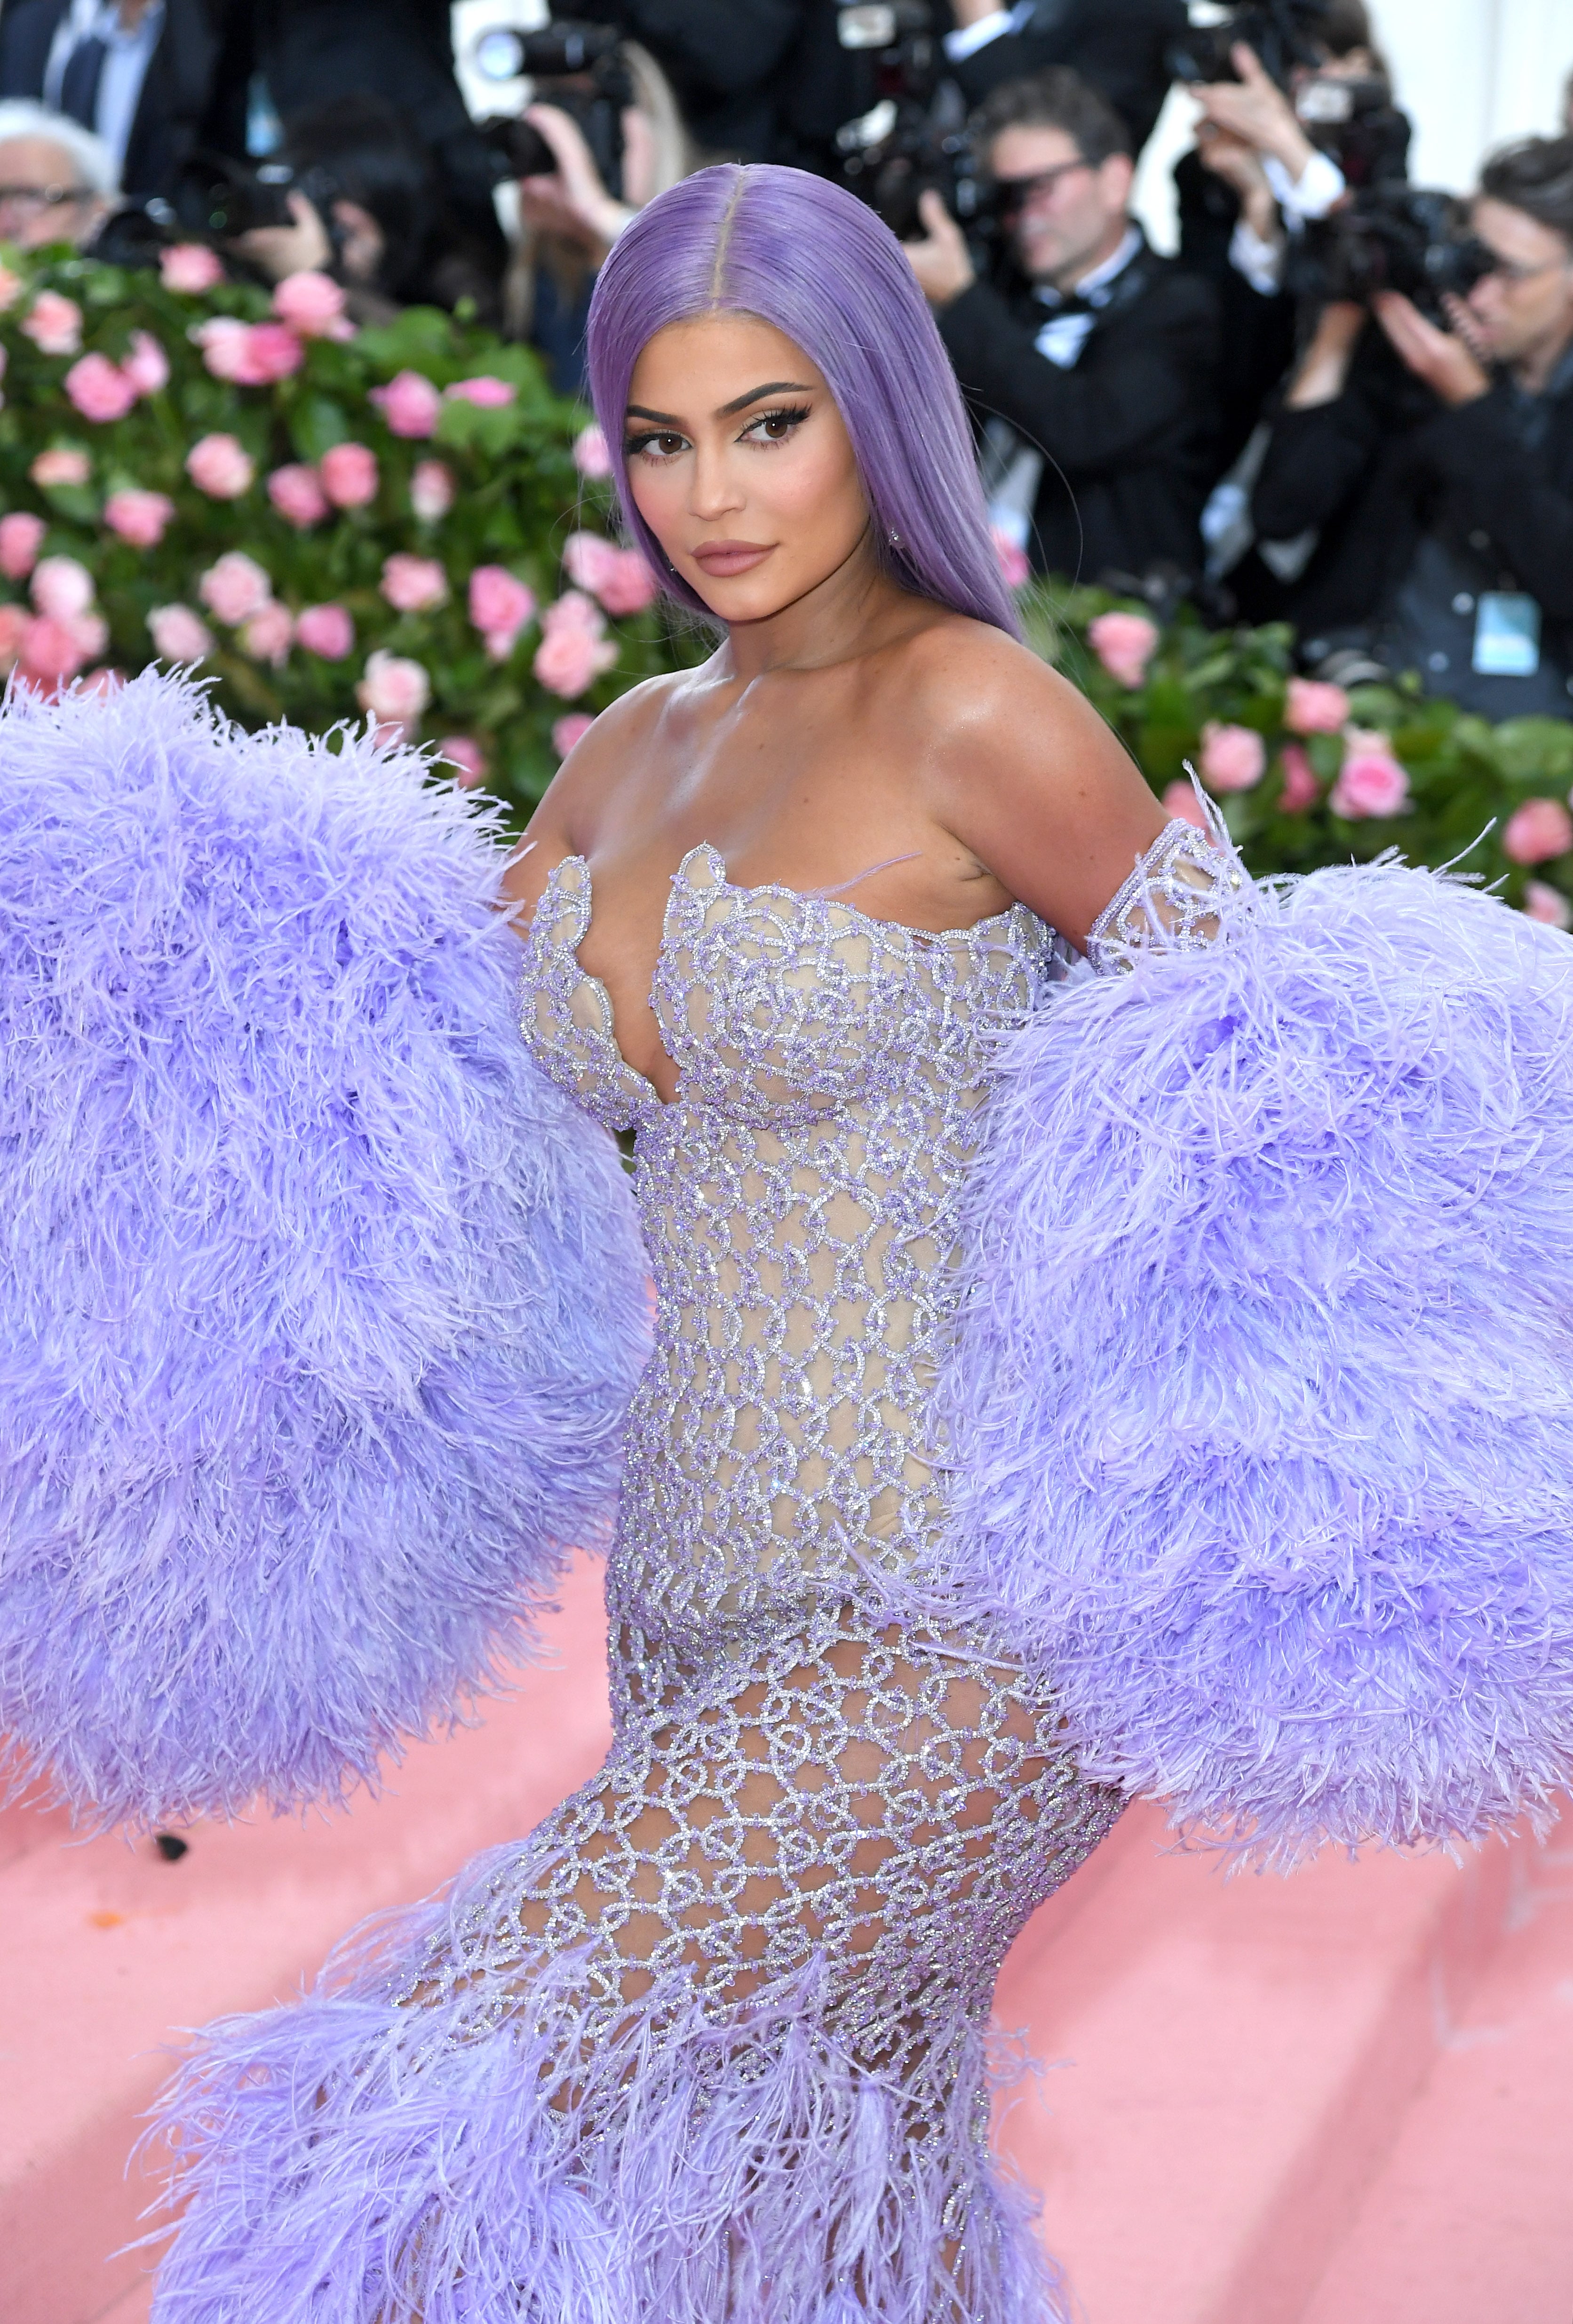 Kendall Jenner and Kylie Jenner Attend 2019 Met Gala